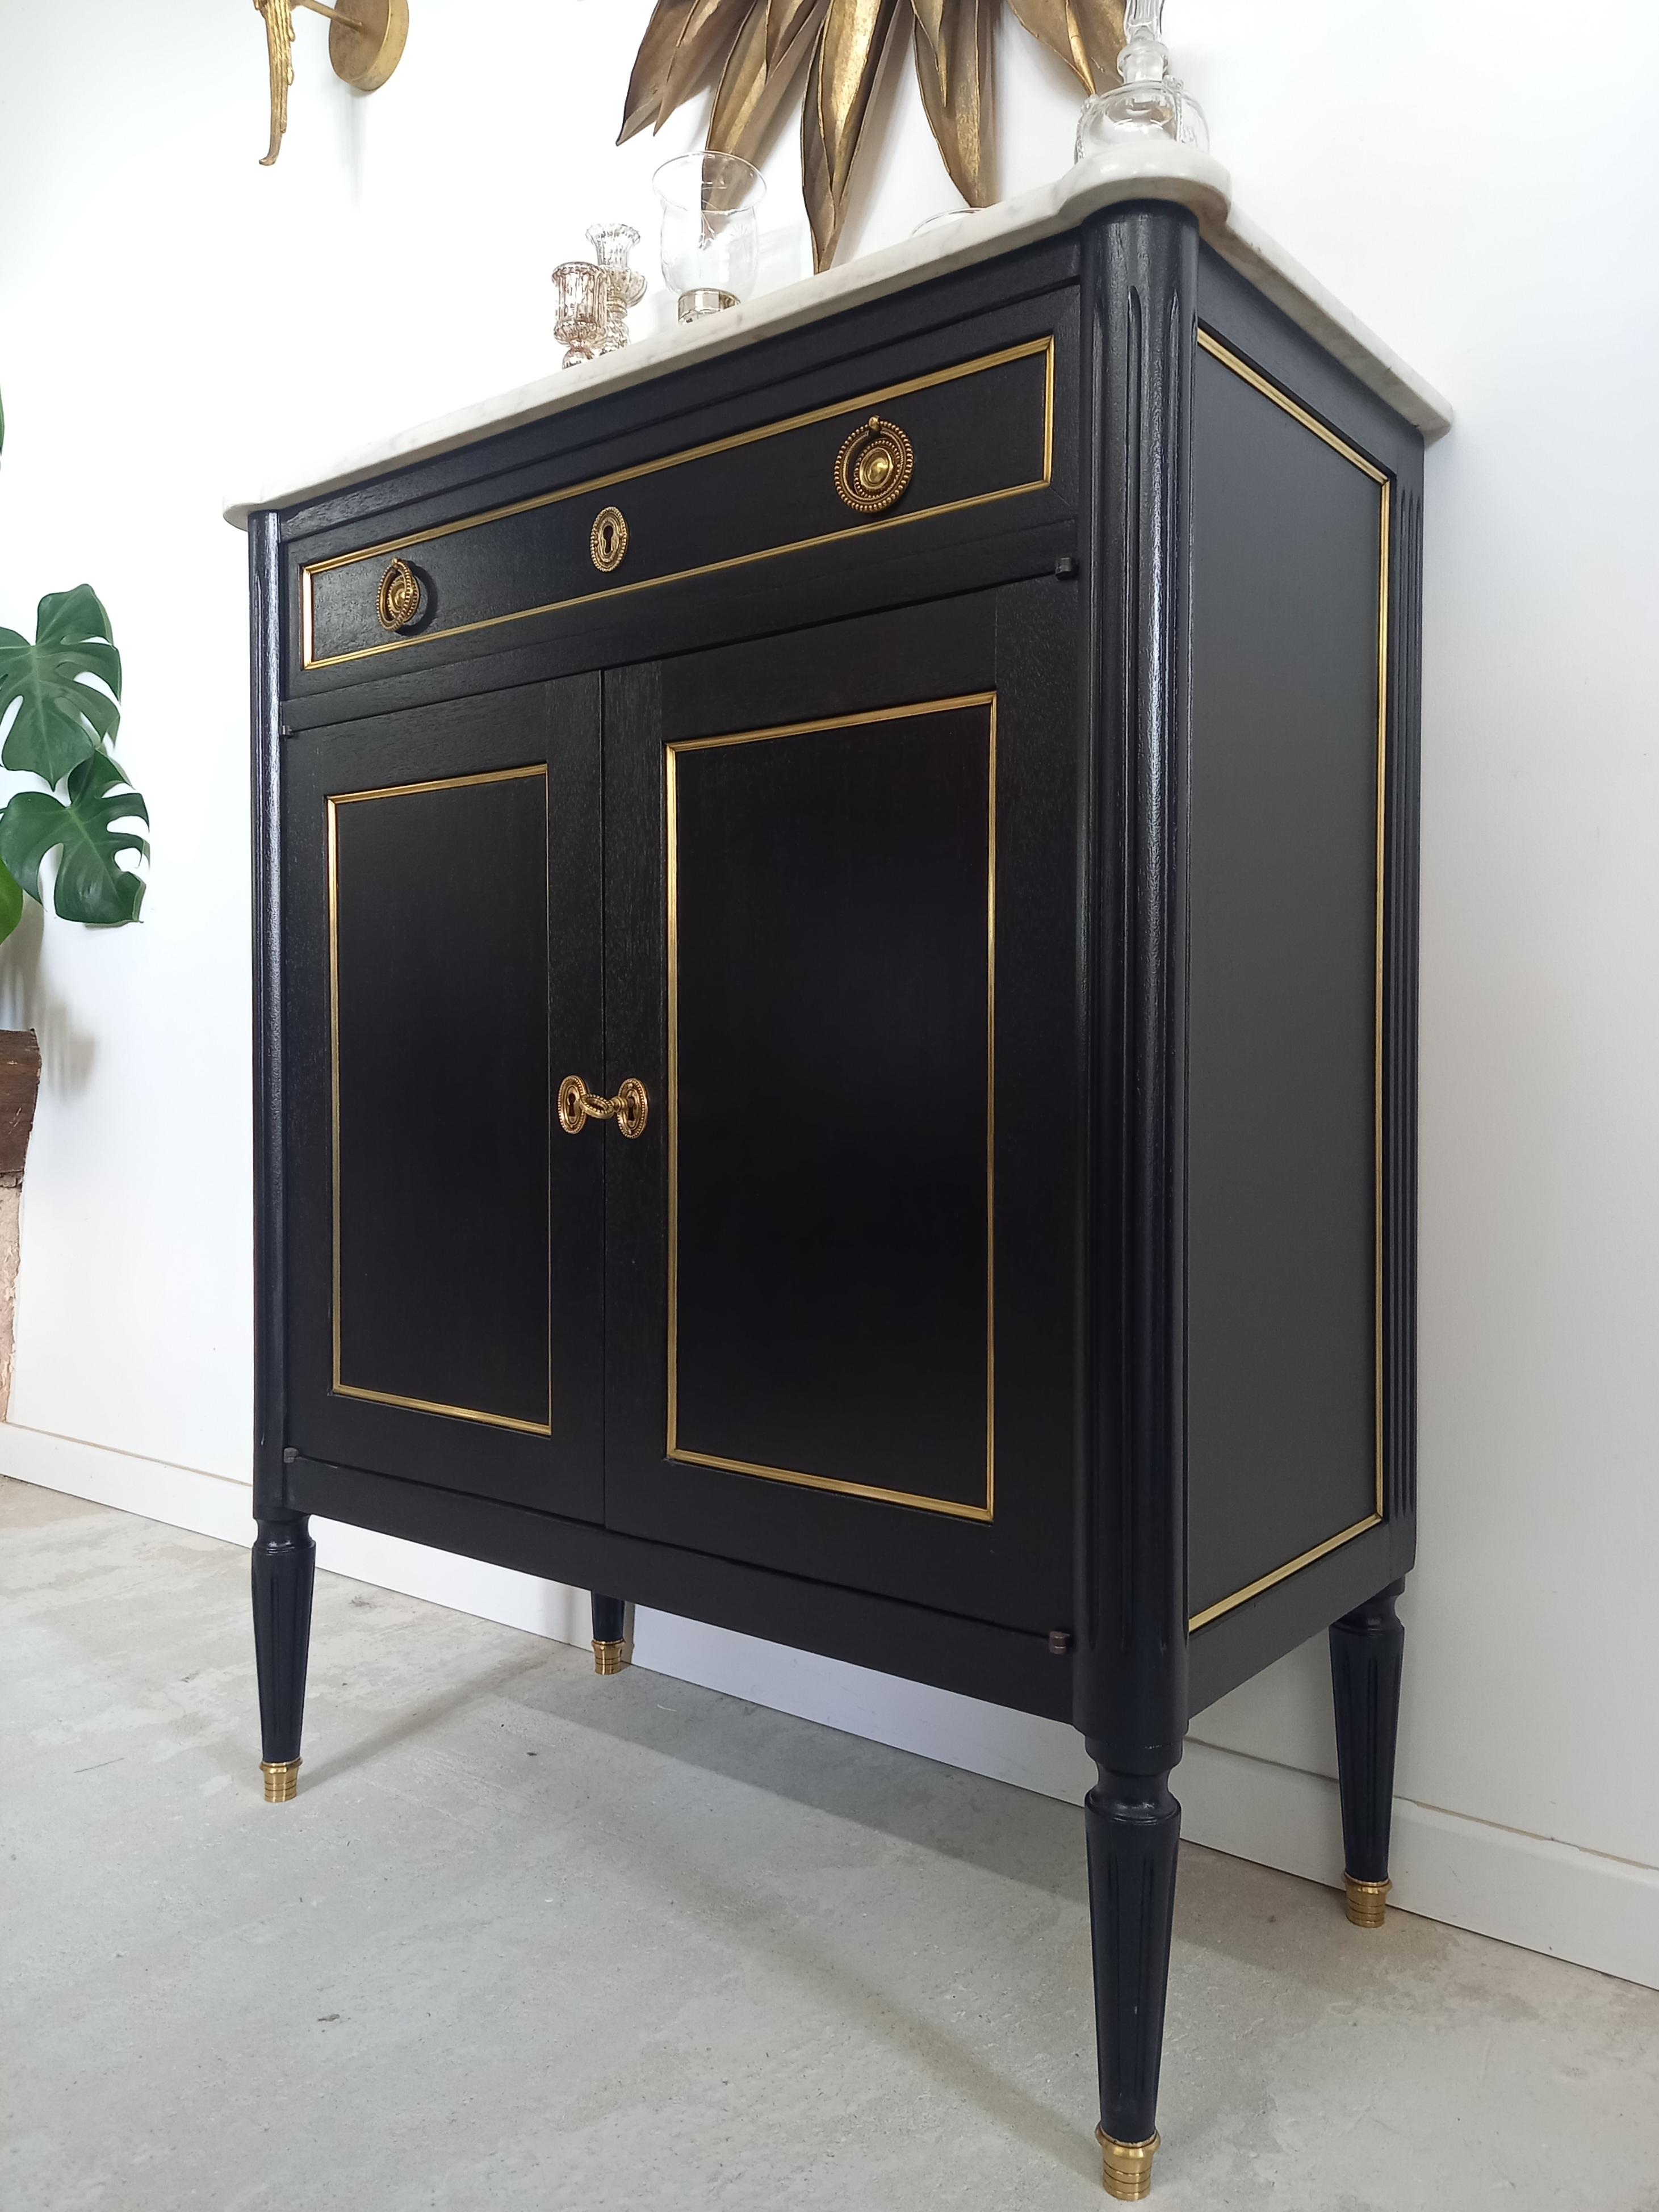 Antique French Louis XVI style bar buffet topped with a white Carrara marble, fluted legs finished with golden bronze clogs.
One dovetailed drawer, two doors and a practical storage space thanks to its height-adjustable shelves.
Perfect to create a